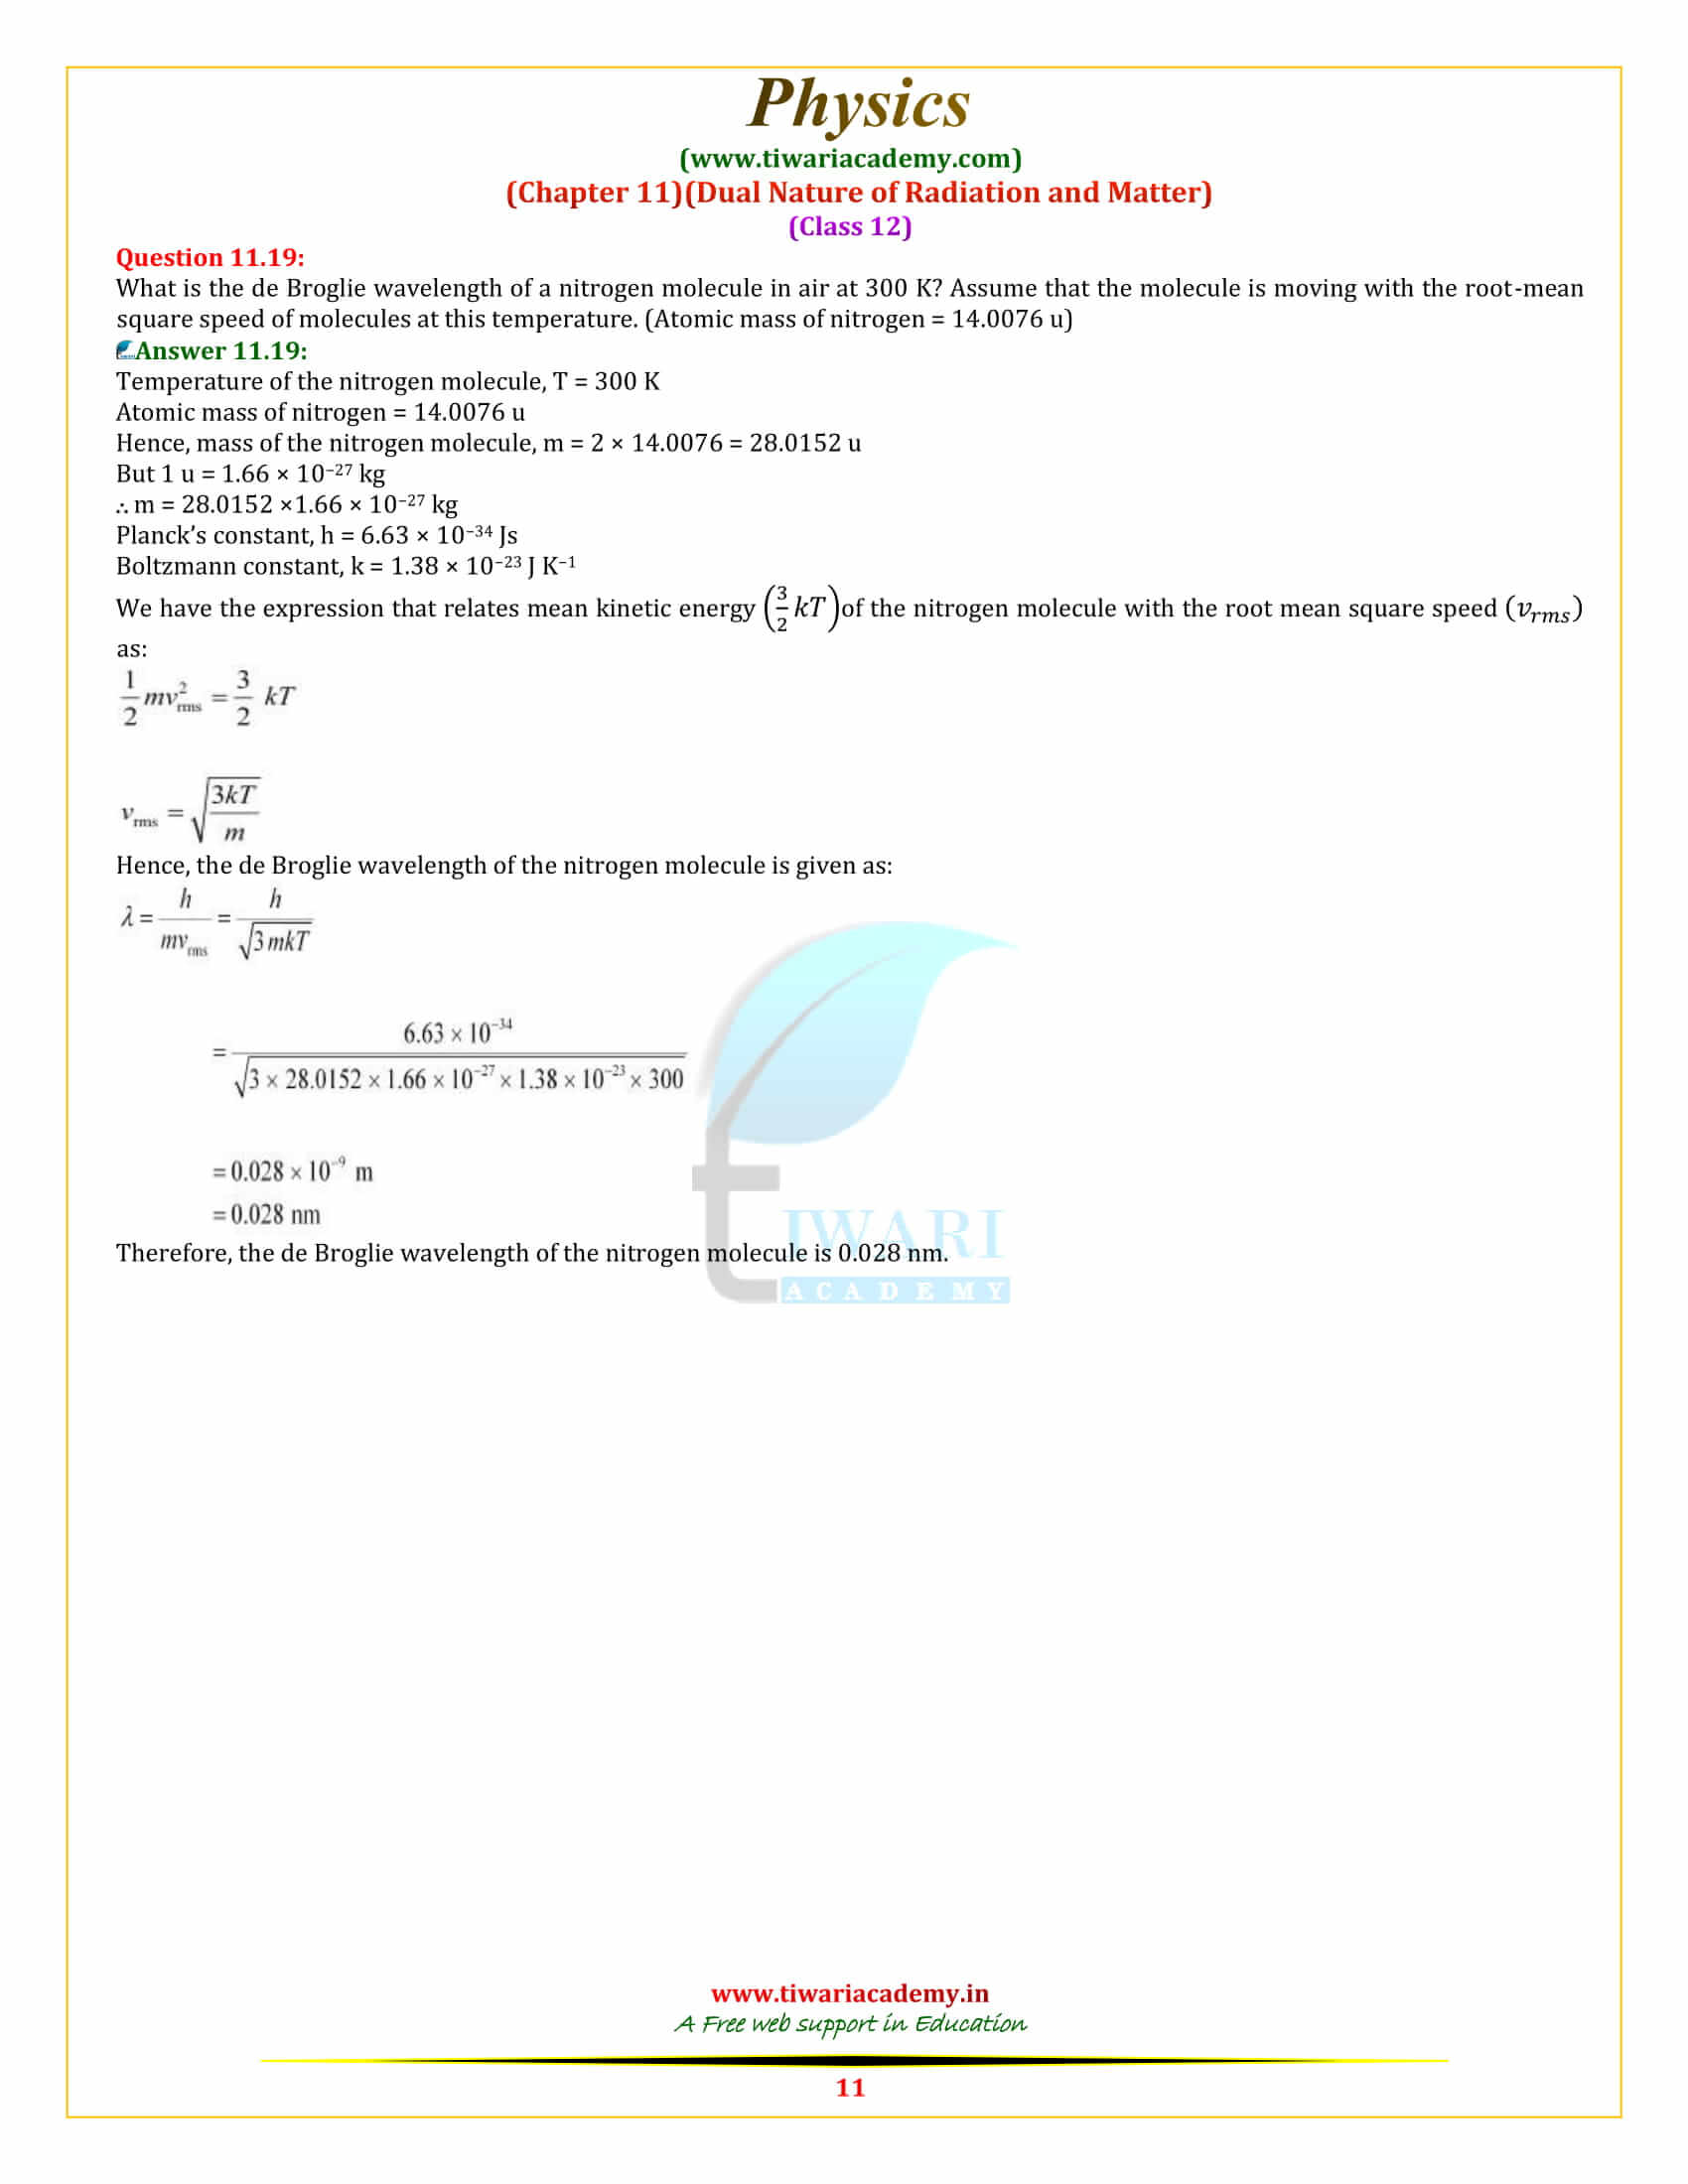 NCERT Solutions for Class 12 Physics Chapter 11 in pdf form